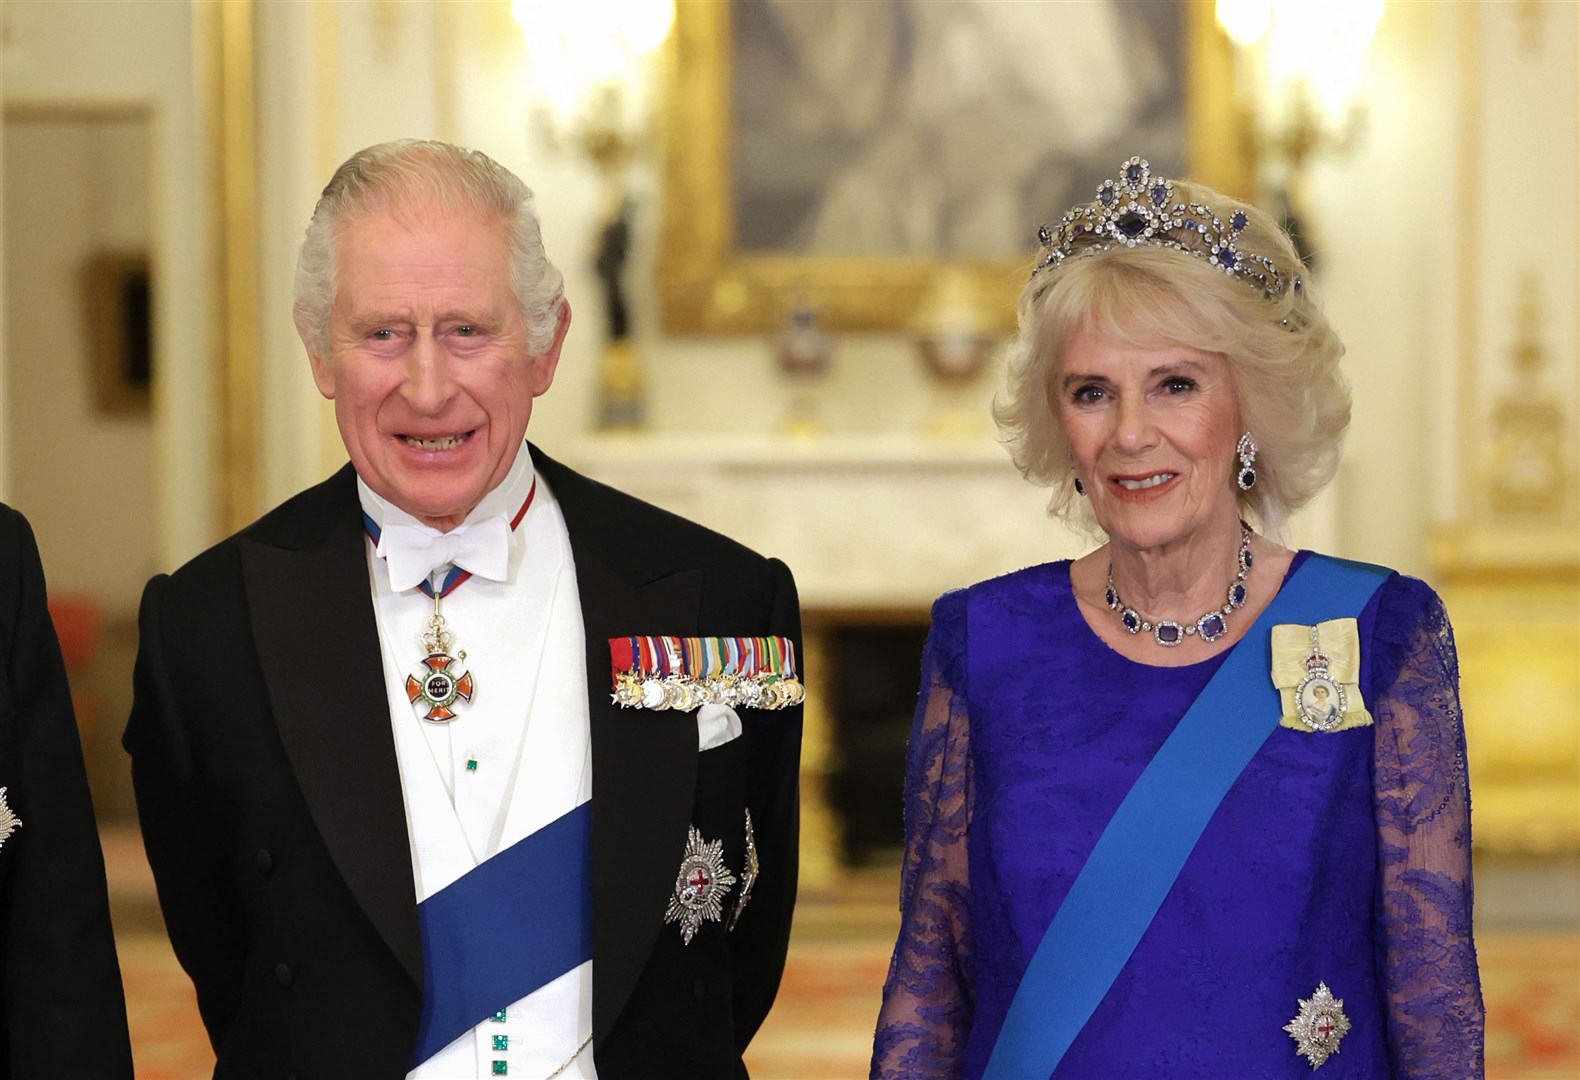 The King and the Queen Consort during the State Banquet this week (Chris Jackson/PA)